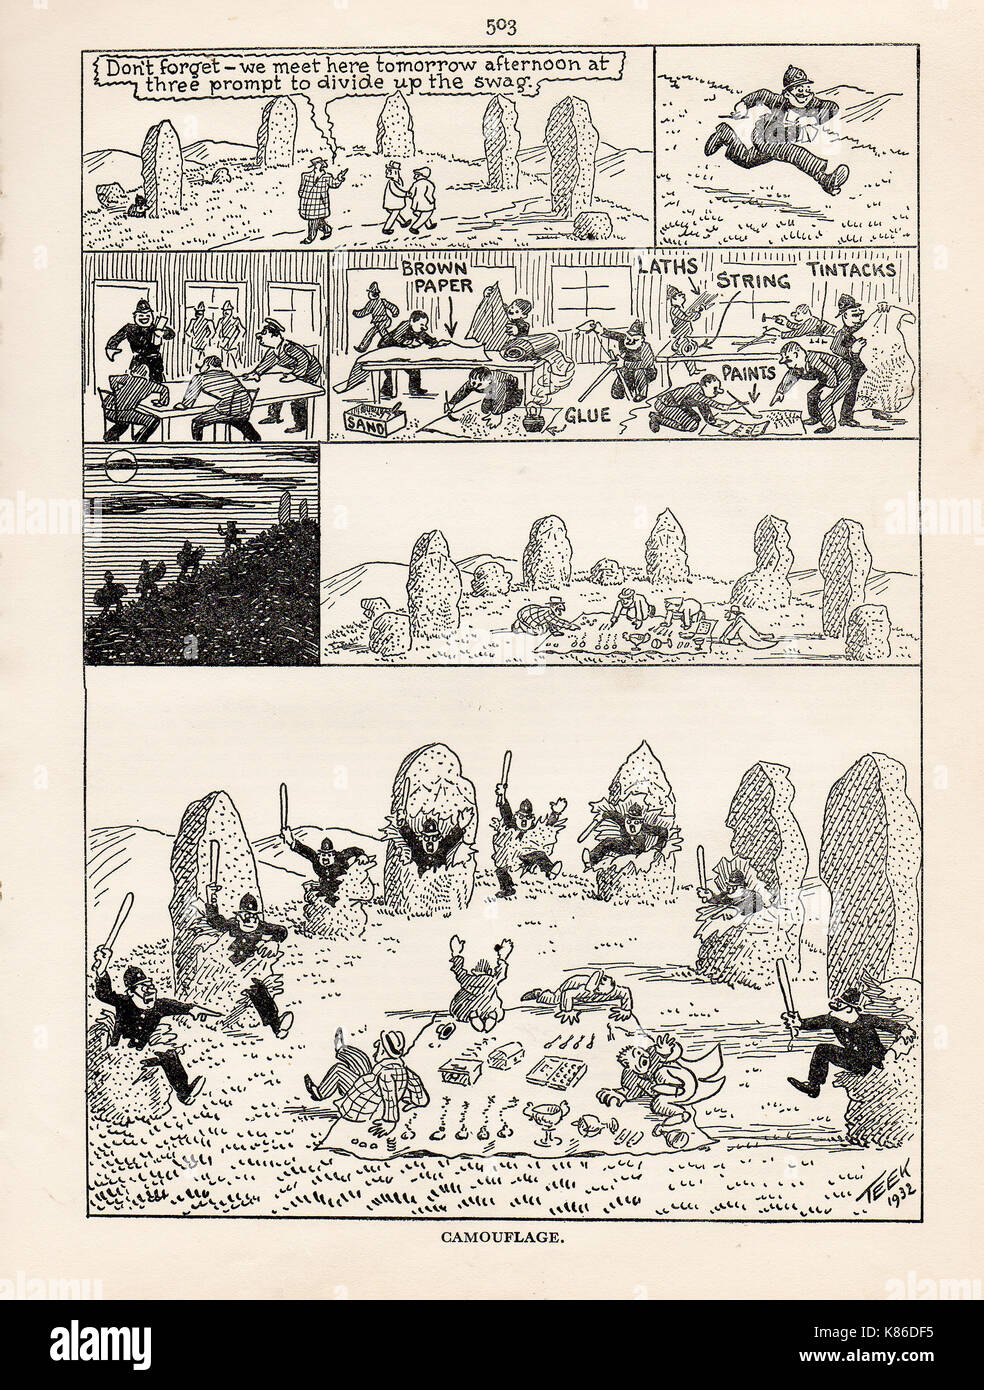 Stonehenge - Cops & Robbers - Camouflage - A strip cartoon from the BOYS OWN ANNUAL 1932/1933 Stock Photo